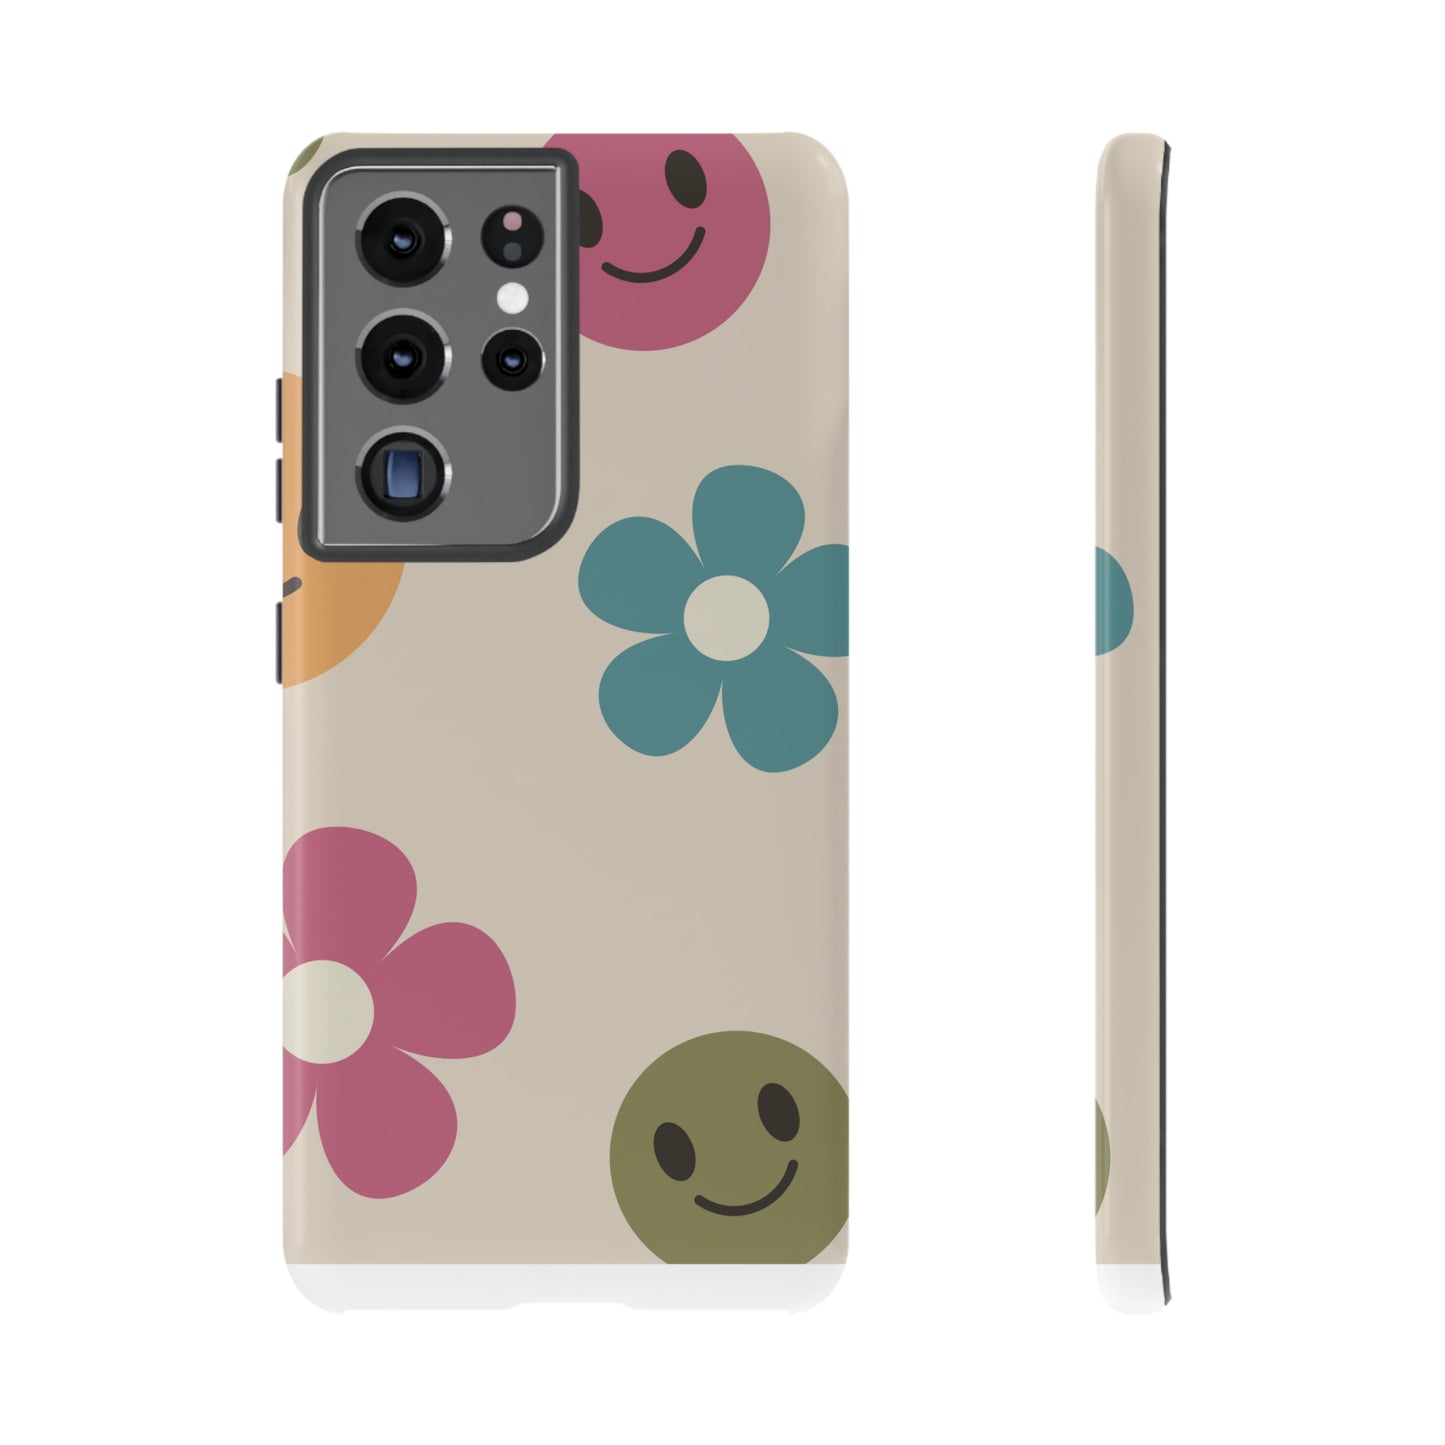 Retro Flower and Smiley Face Cell Phone Case, iPhone, Samsung Galaxy, Google Pixel Tough Cases, Free Shipping, School